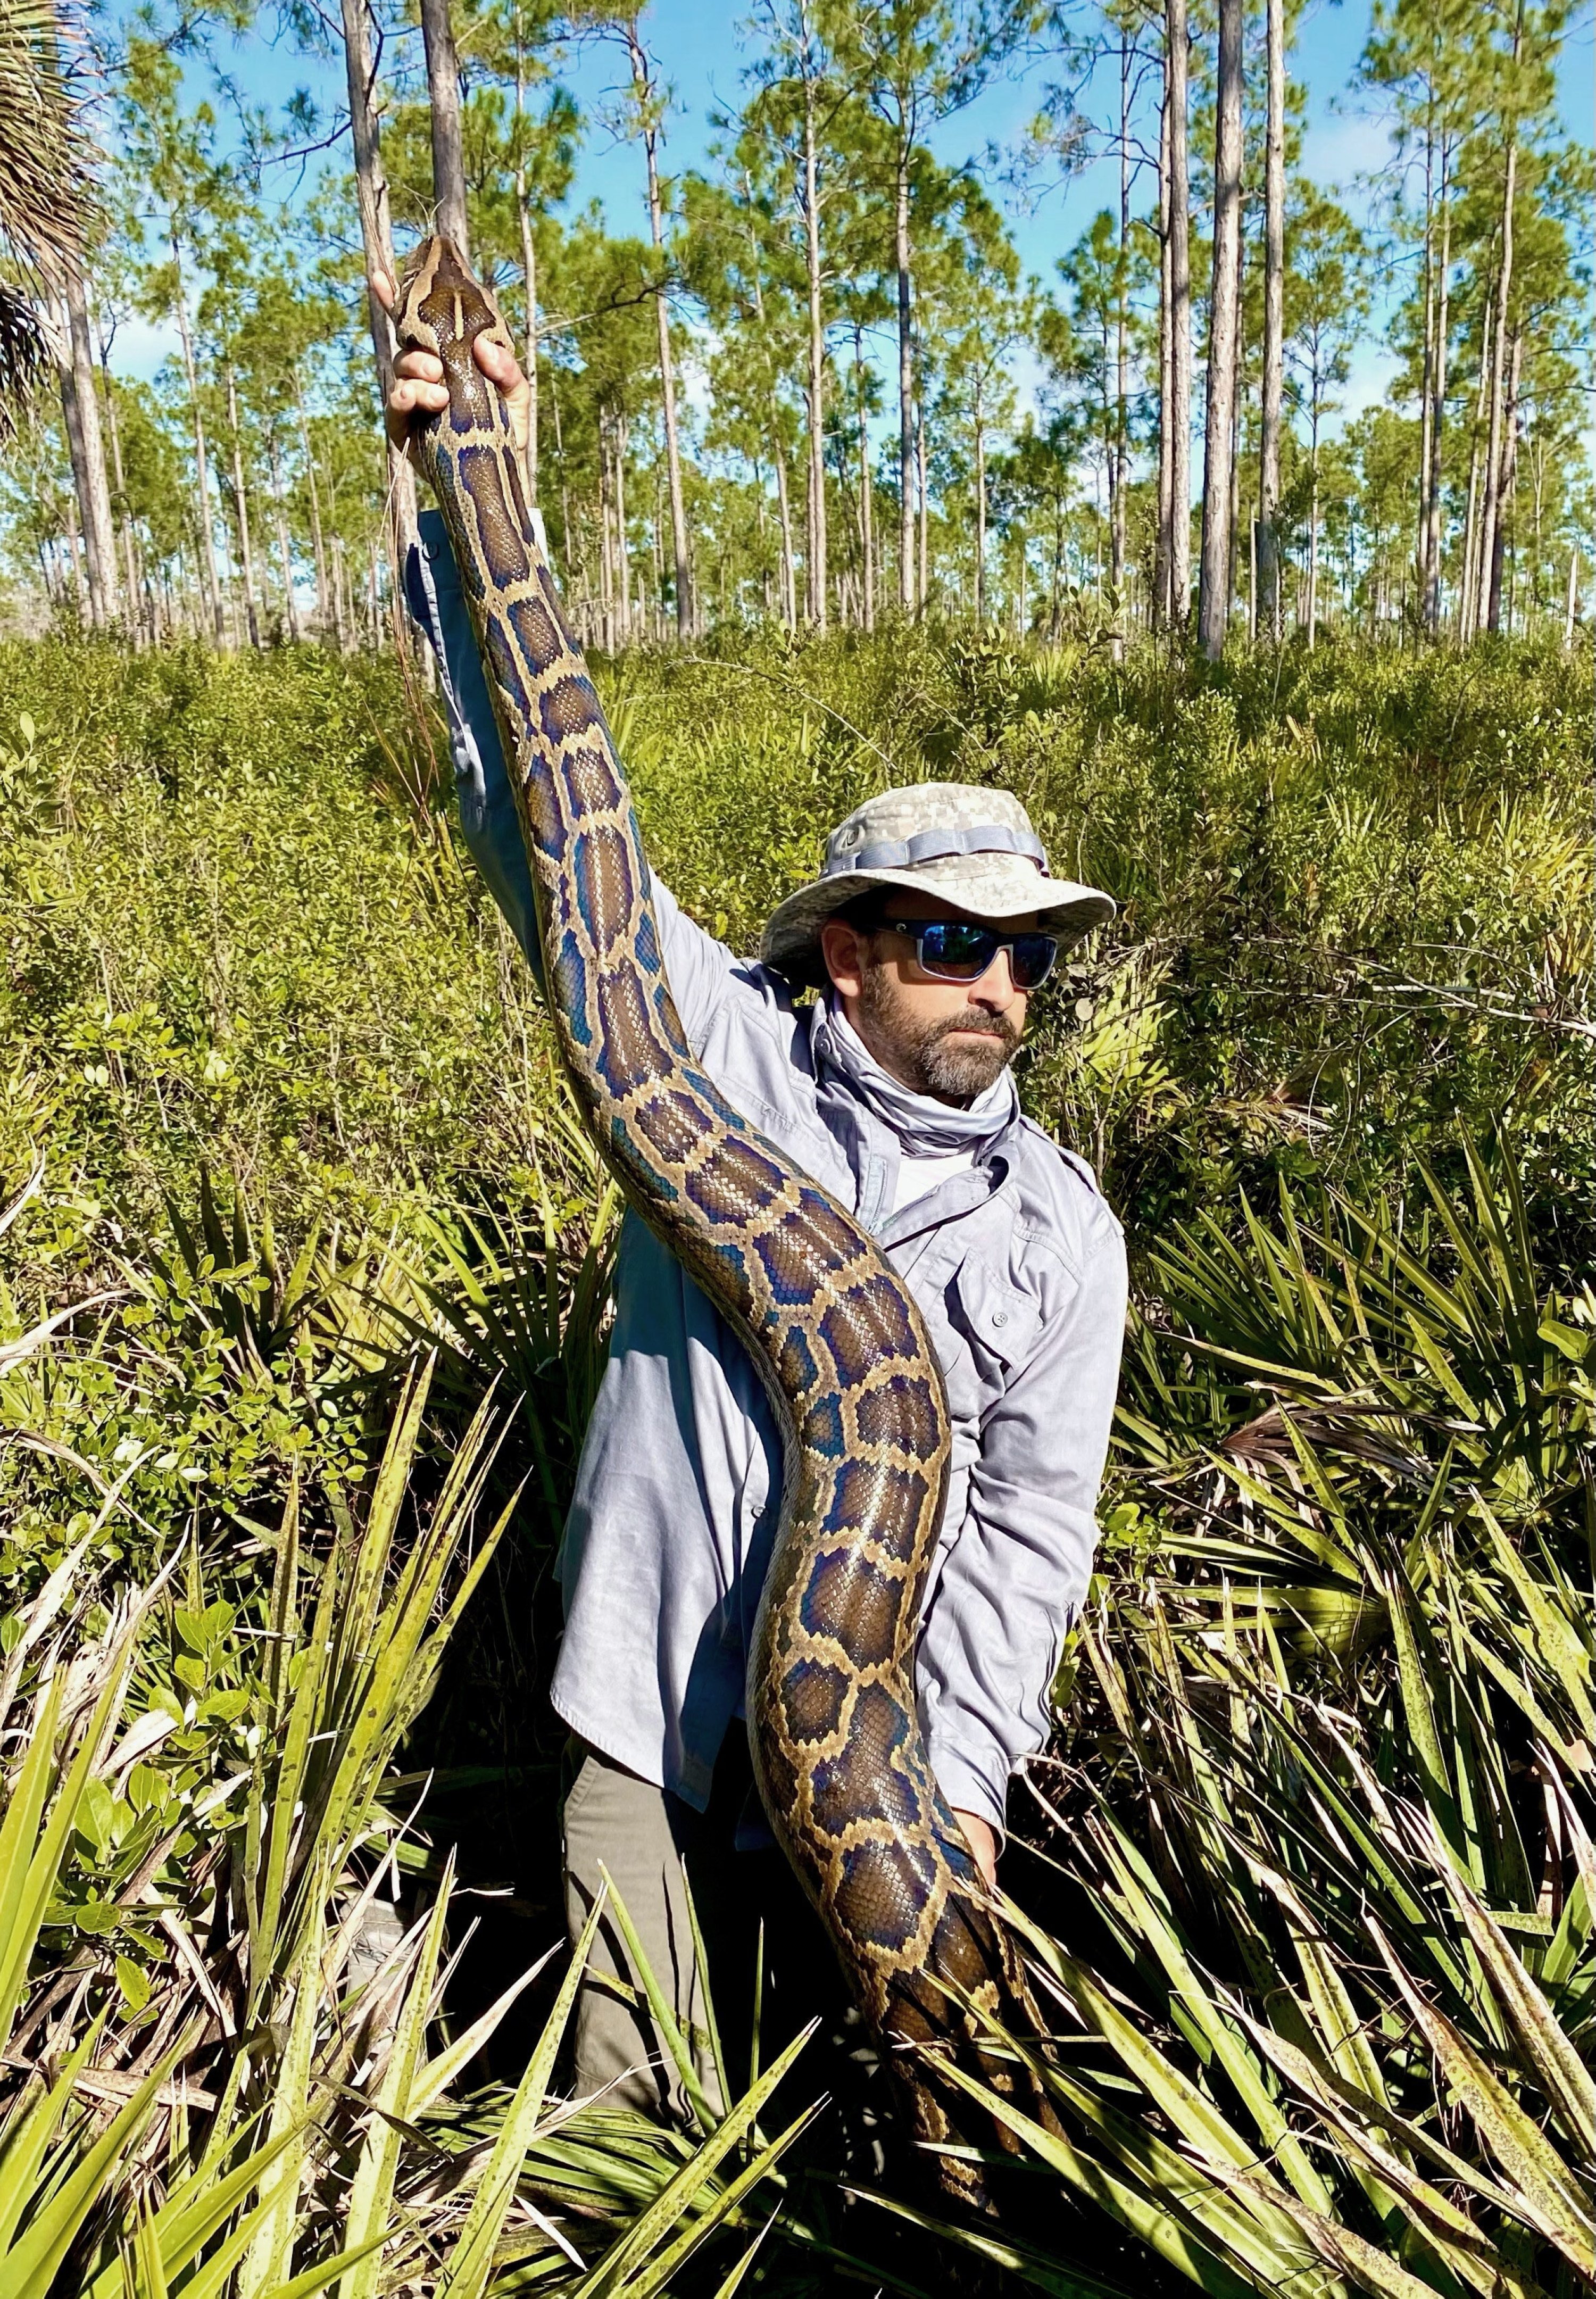 This photo provided by the Conservancy of Southwest Florida shows biologist Ian Bartoszek with a 15-foot female Burmese python captured by tracking a male scout snake in Picayune Strand State Forest, Florida, U.S., June 22, 2022. (AP Photo)